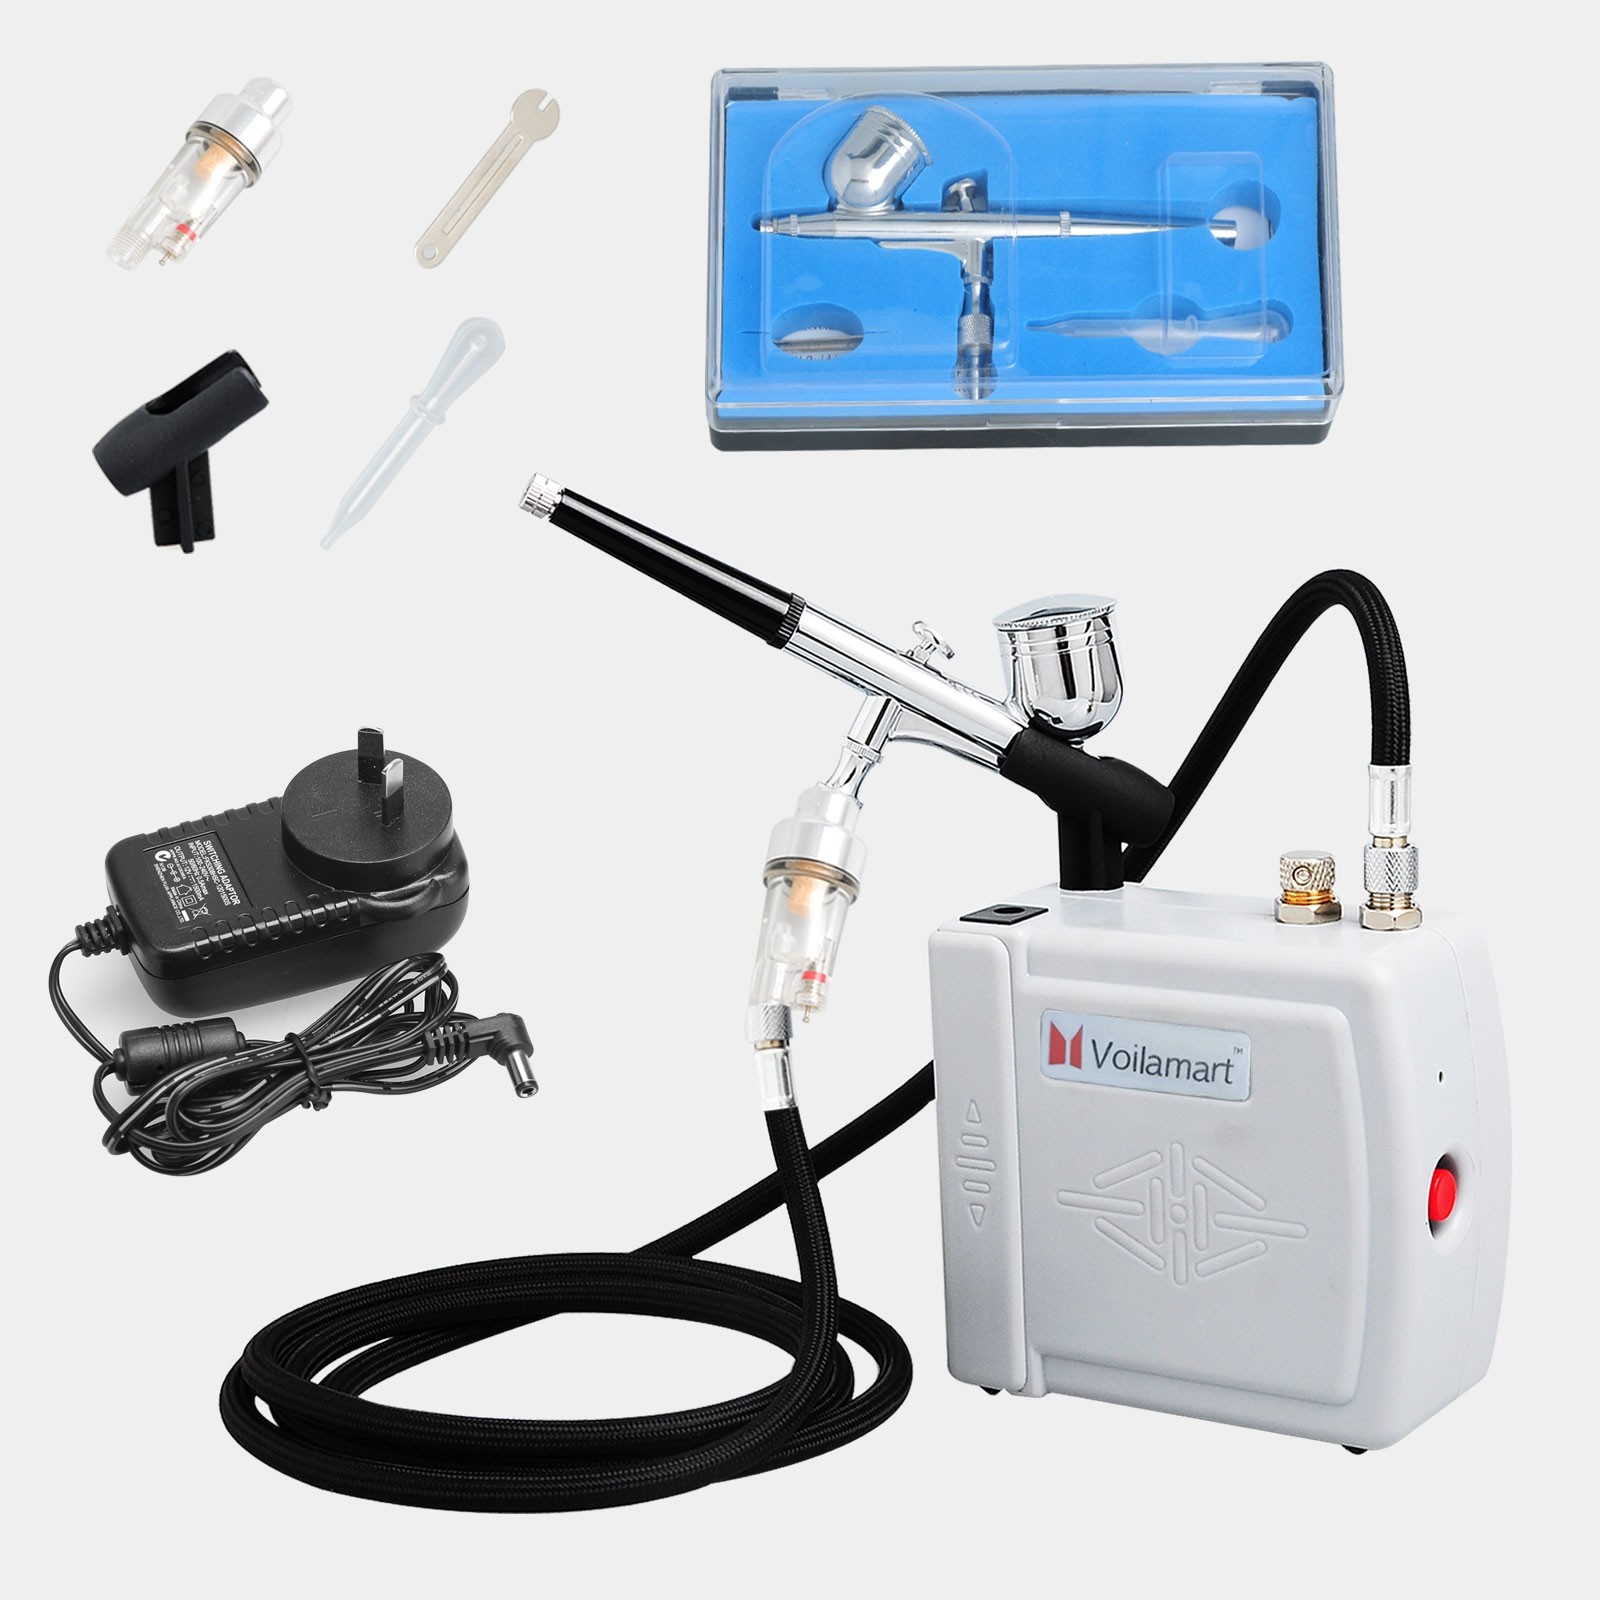 HITIK Airbrush Kit with Compressor,8 Paints, 3 Airbrush Guns, Dual Action